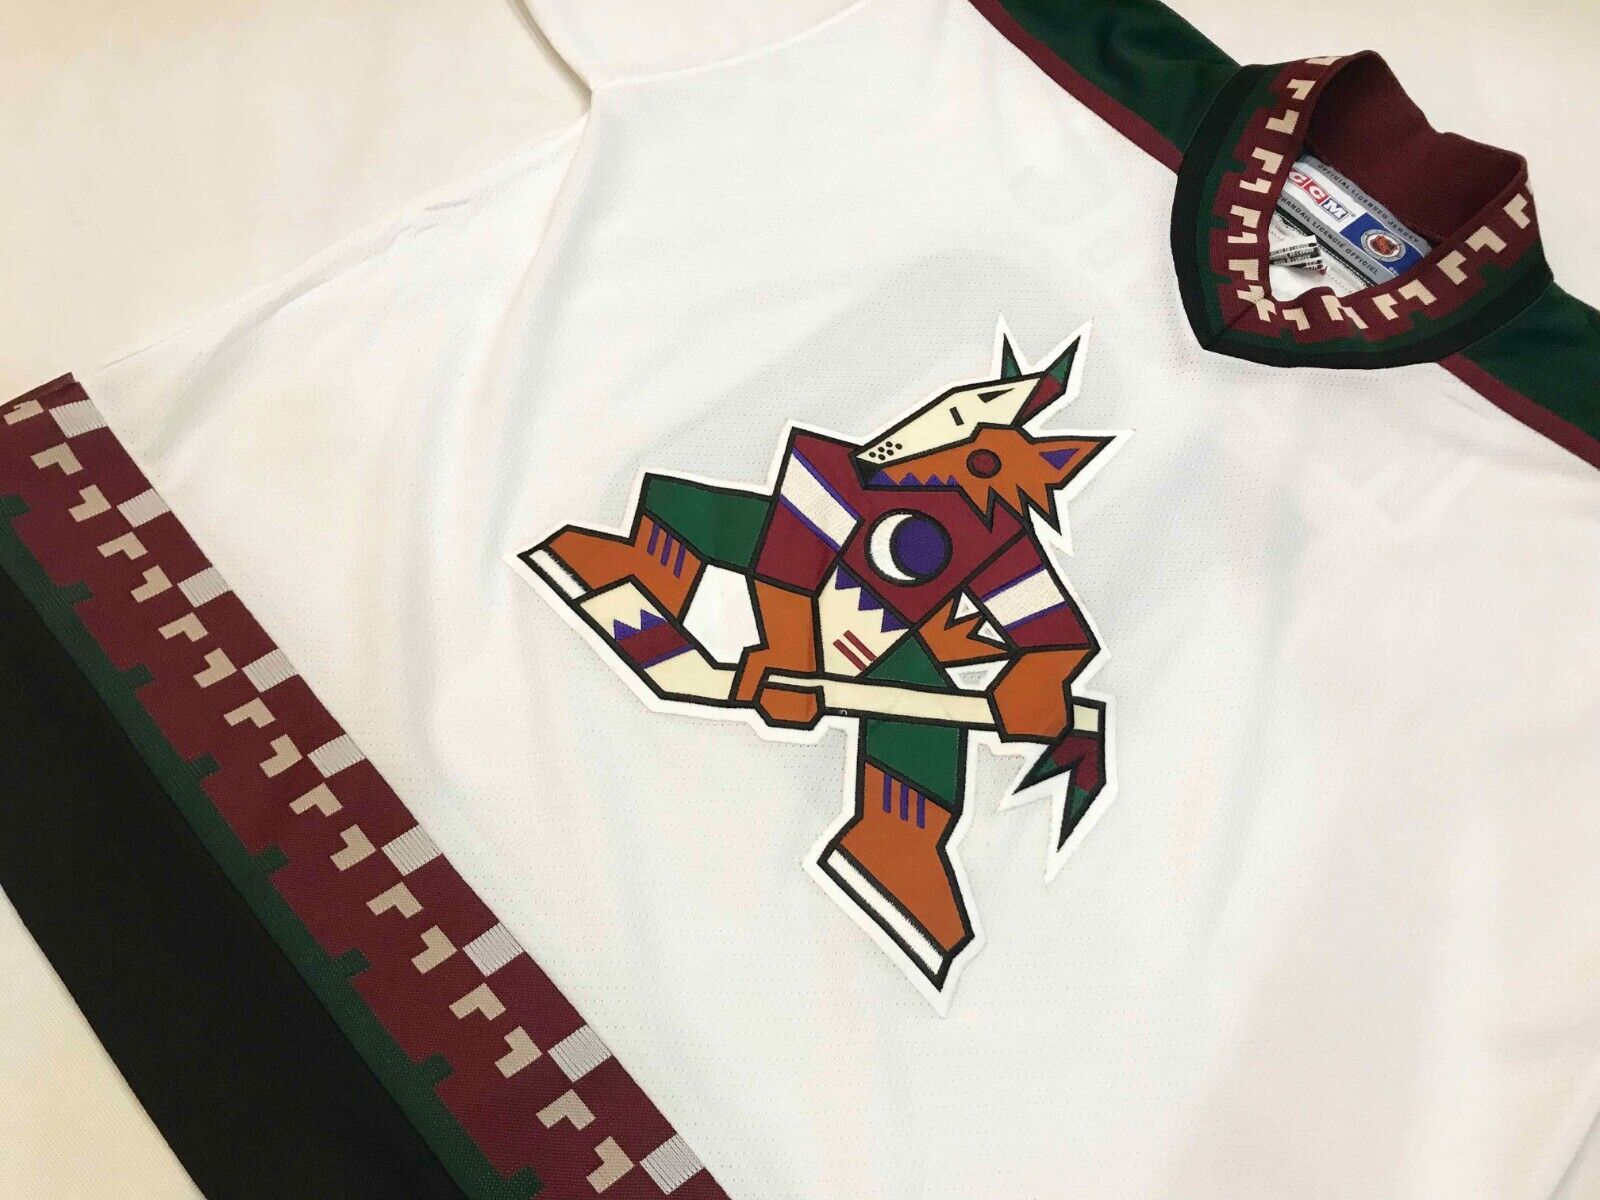 Arizona Coyotes CCM Center-Ice White 17000 YOUTH Jersey - Hockey Jersey  Outlet